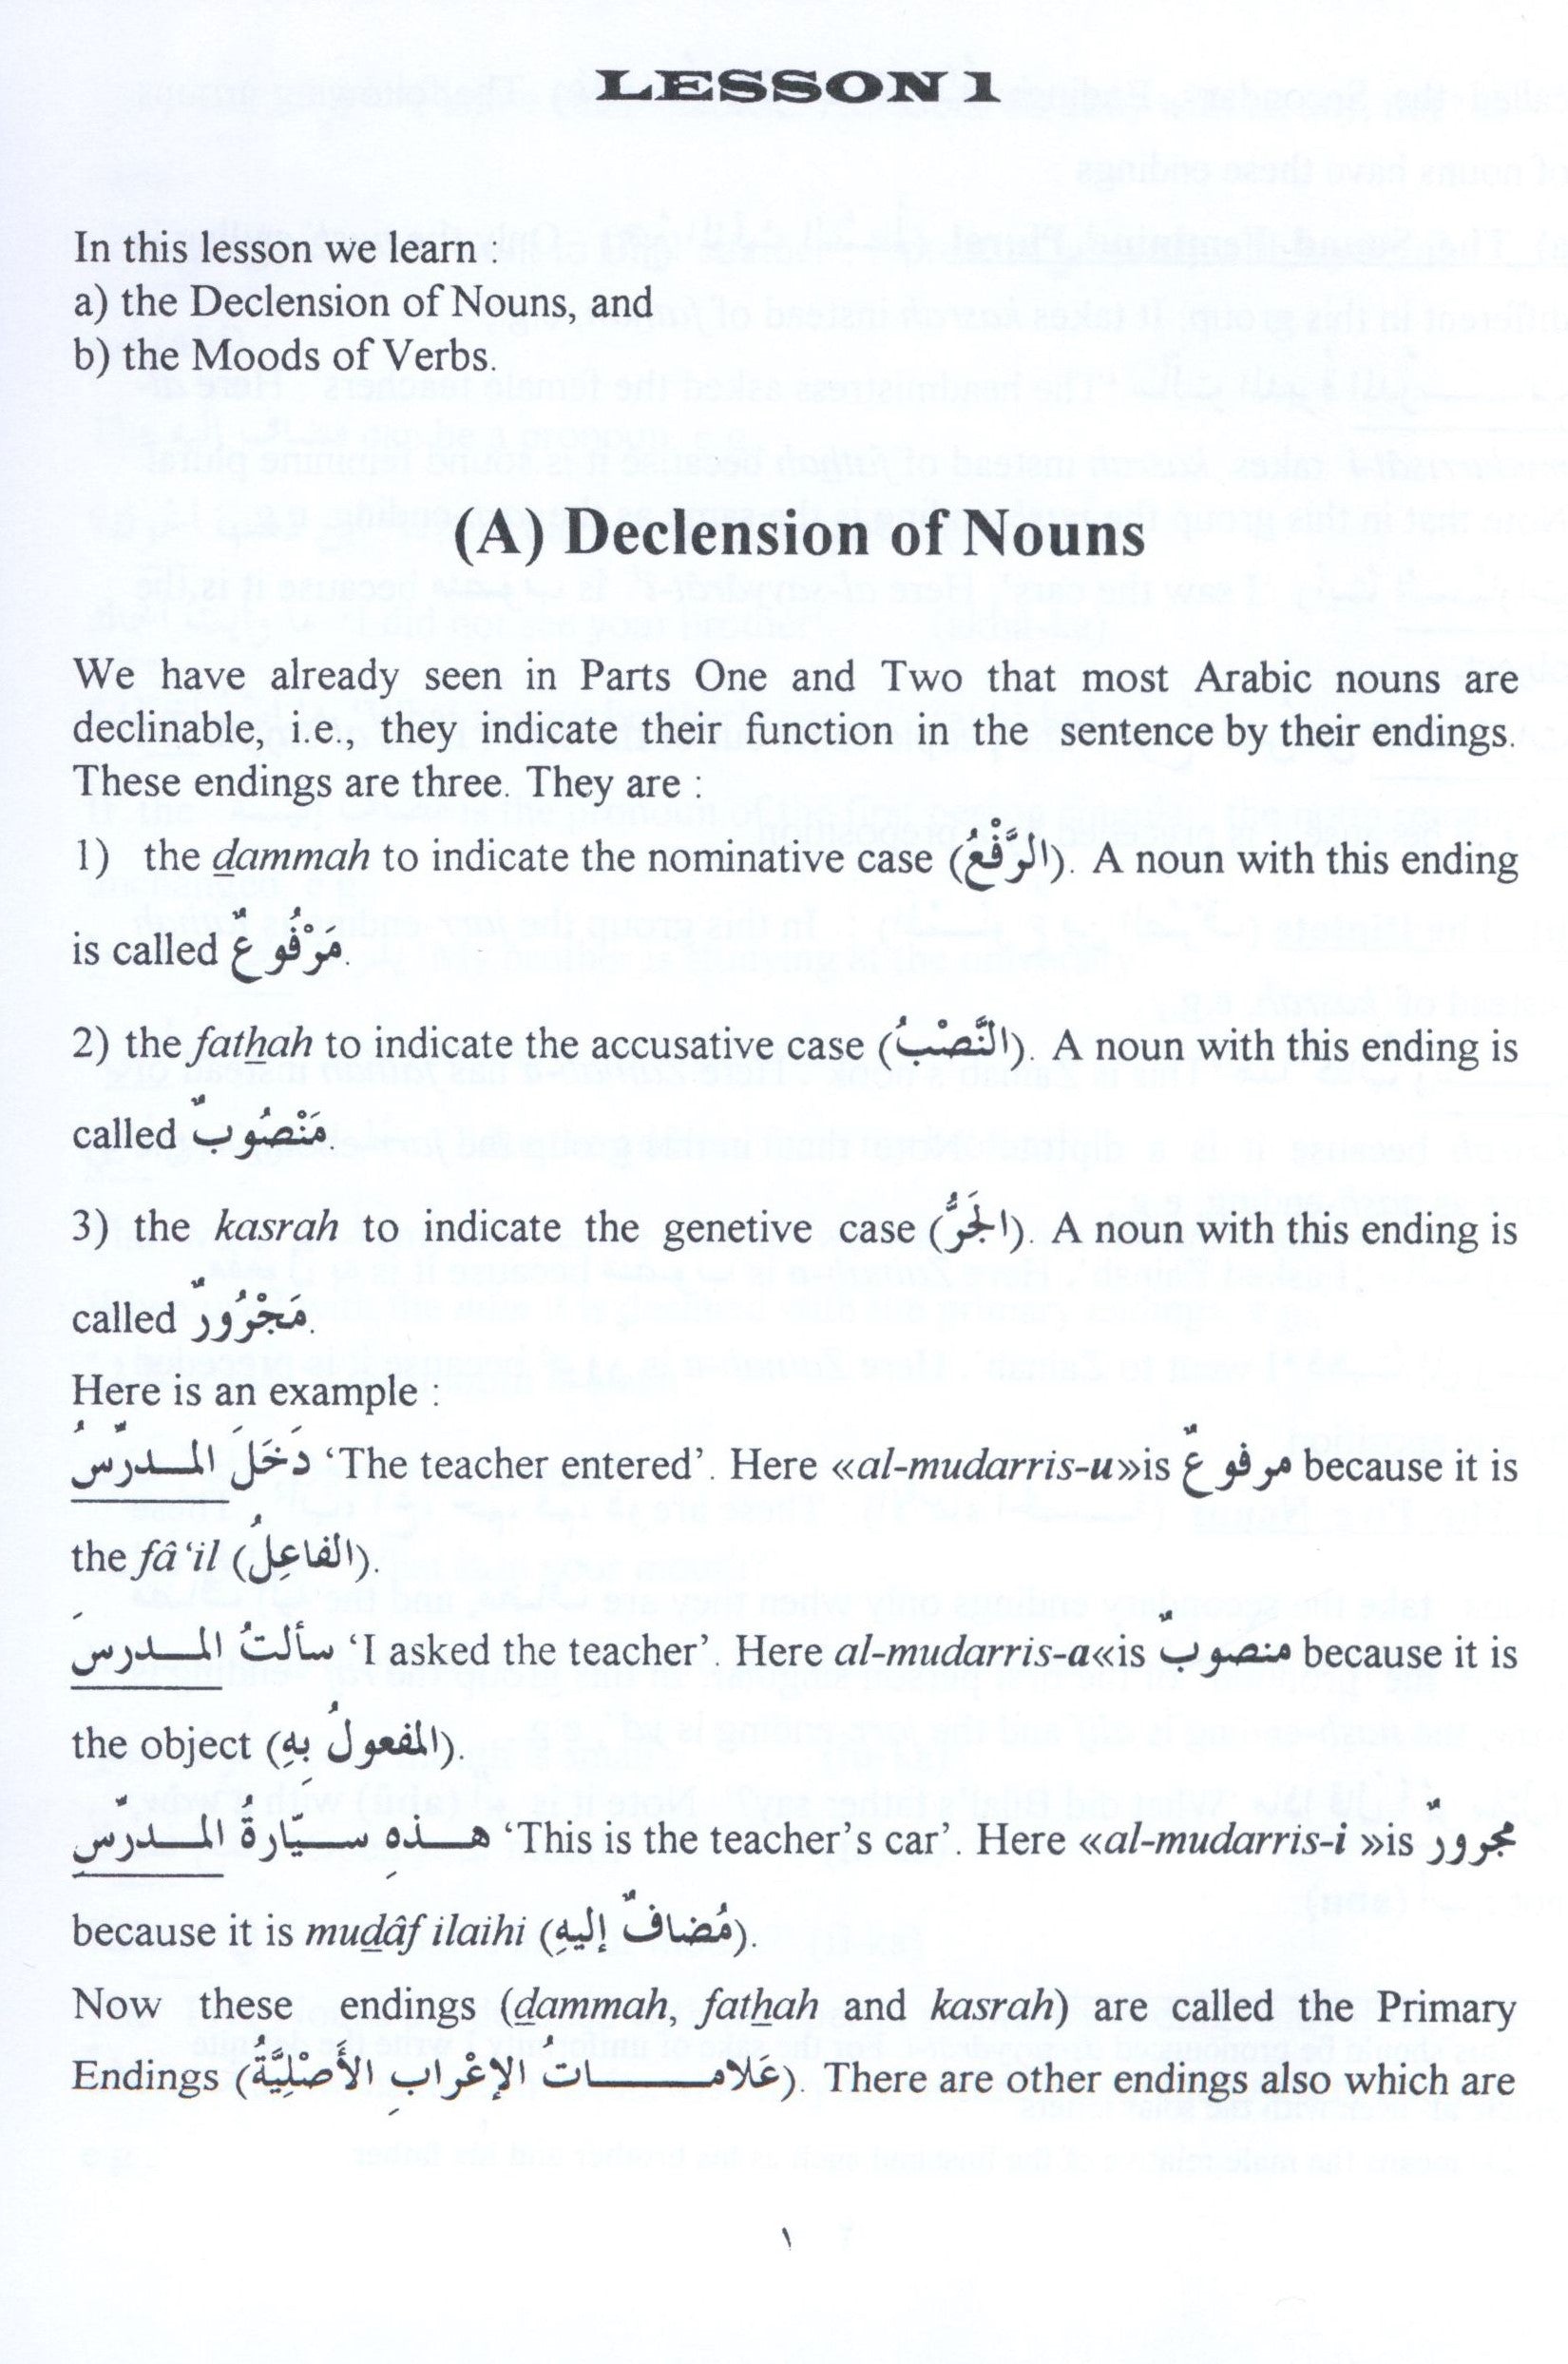 Arabic Course for English Speaking Students Volume 3